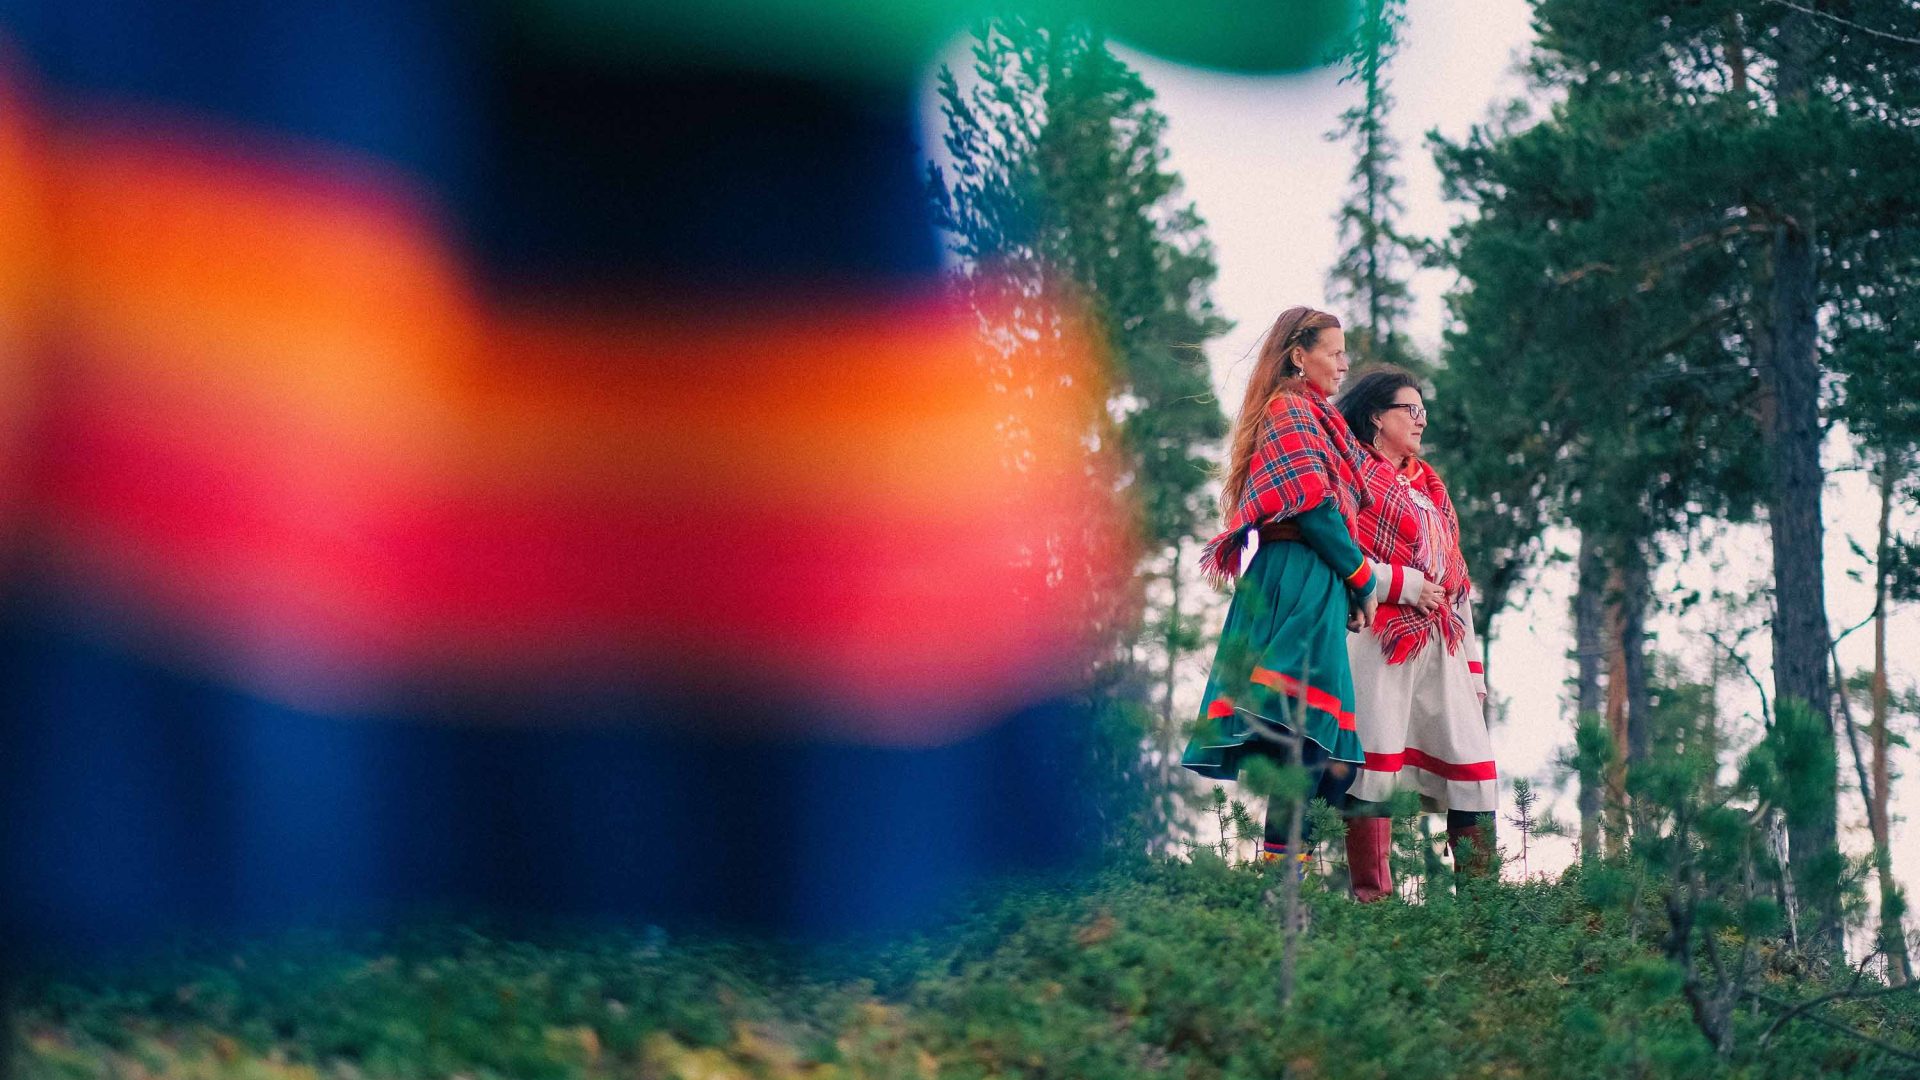 Two women look off into the distance. They are wearing colorful dresses.